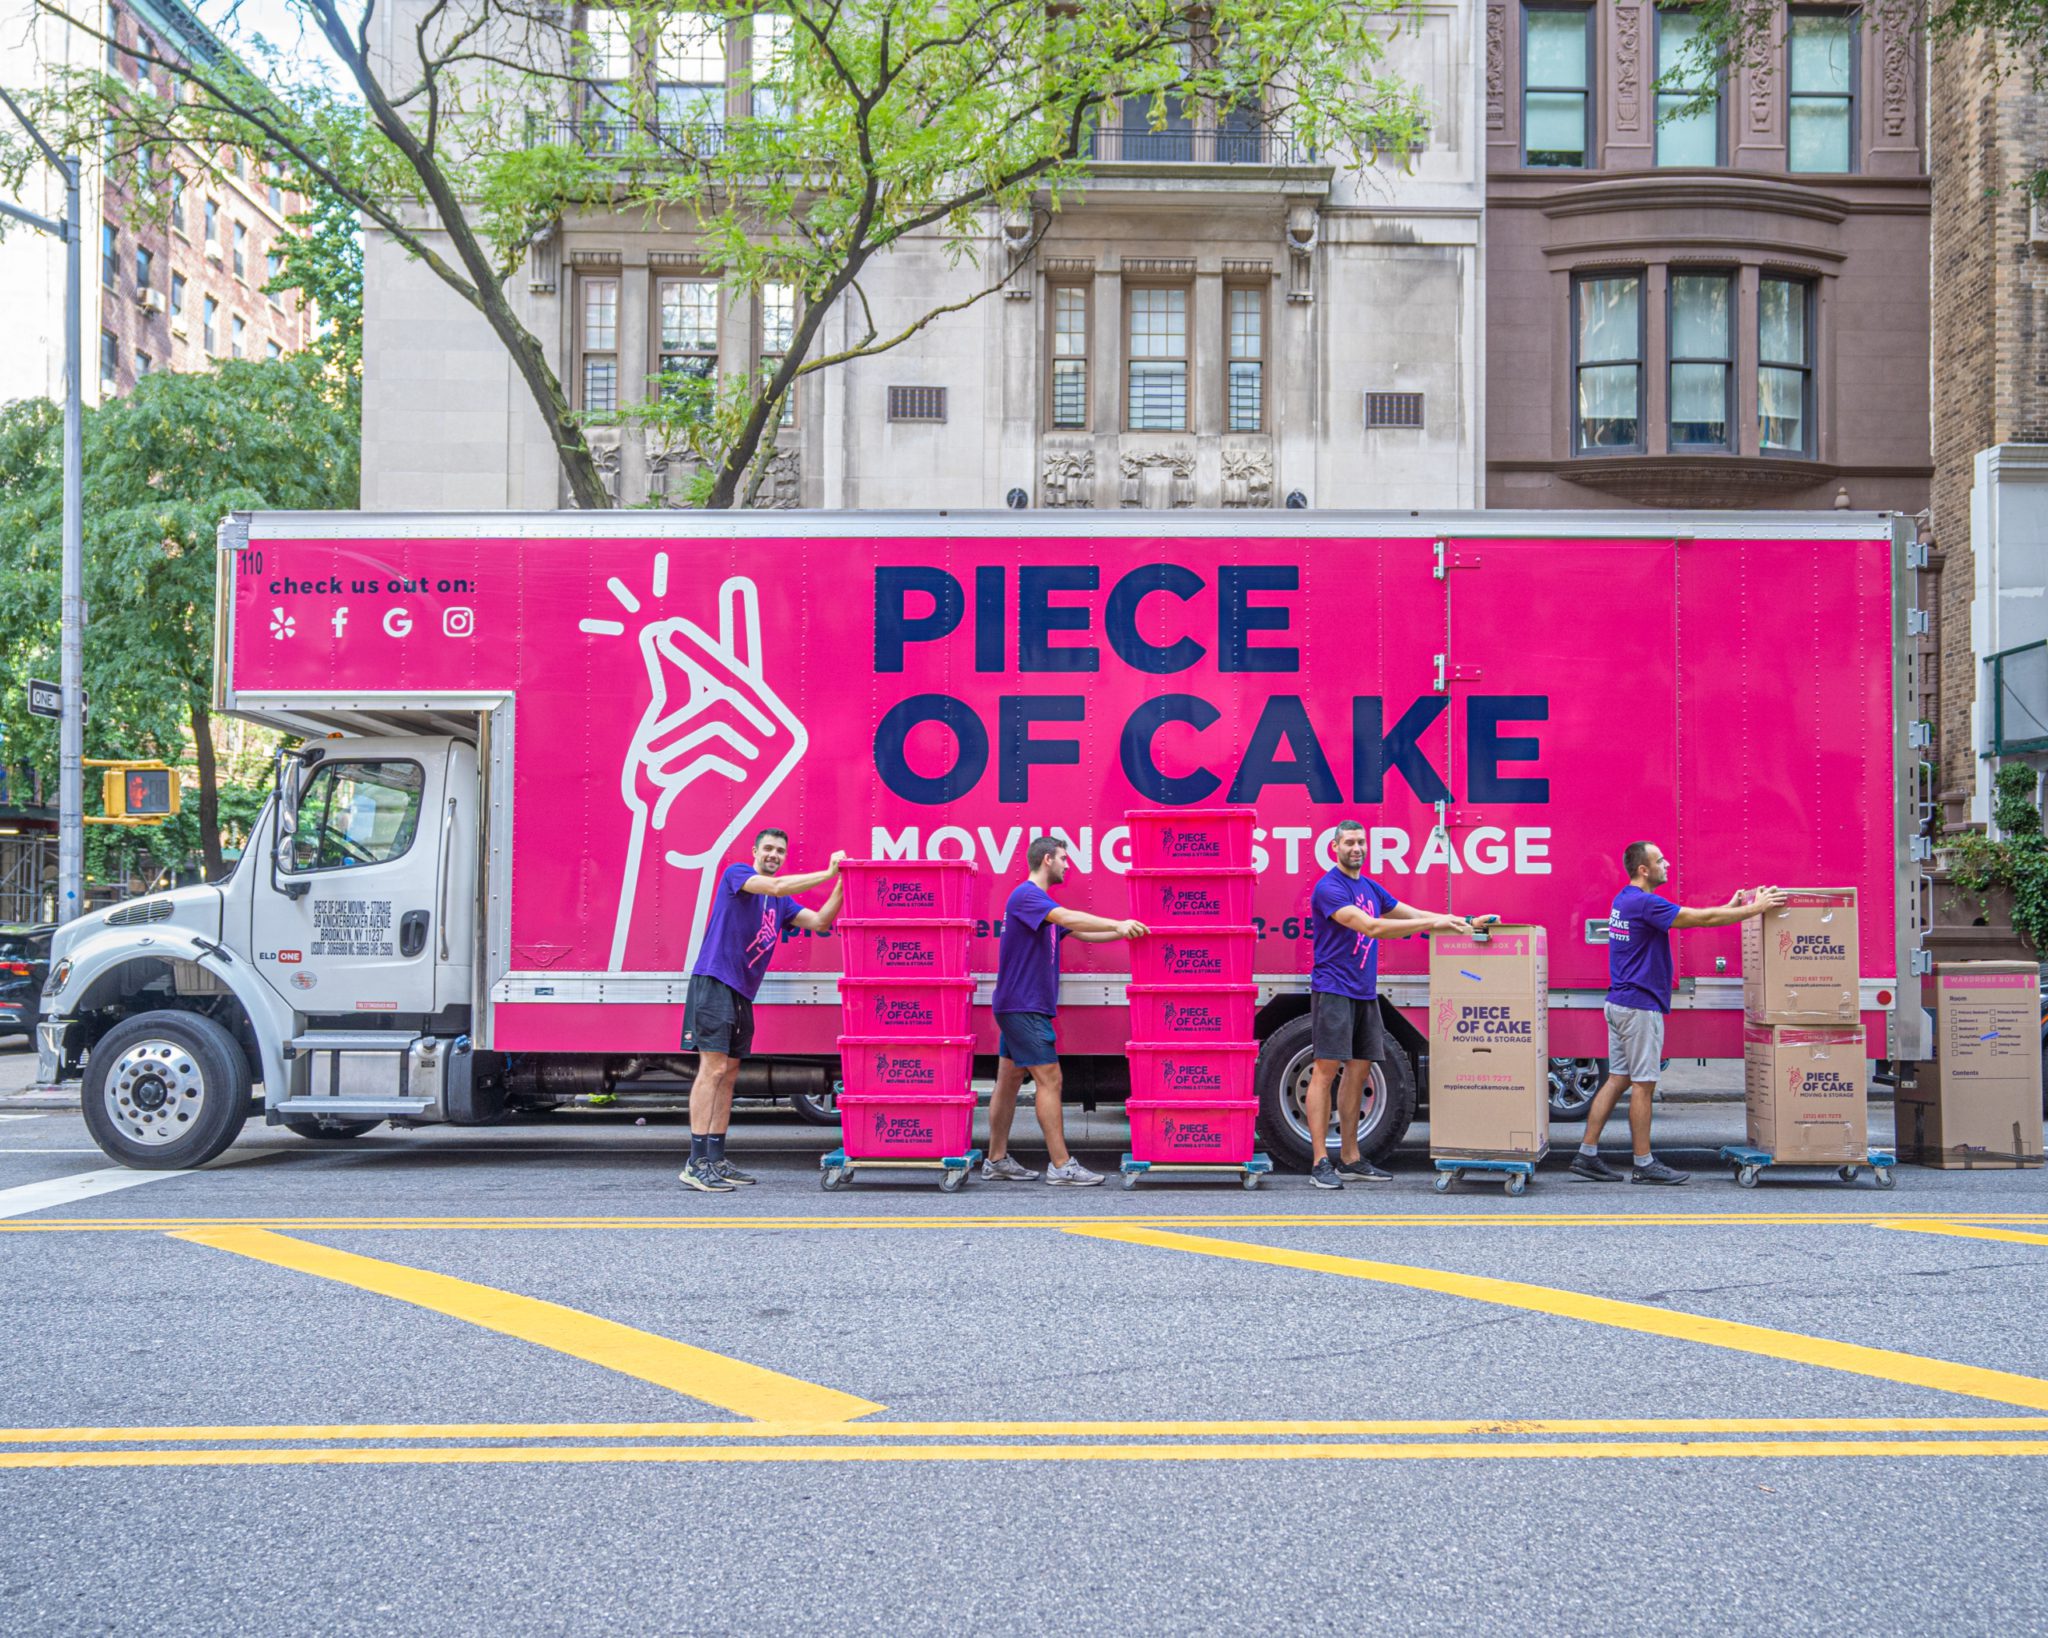 https://mypieceofcakemove.com/wp-content/uploads/2023/03/Piece-of-Cake-Moving-Movers-With-Pink-Truck-scaled.jpg